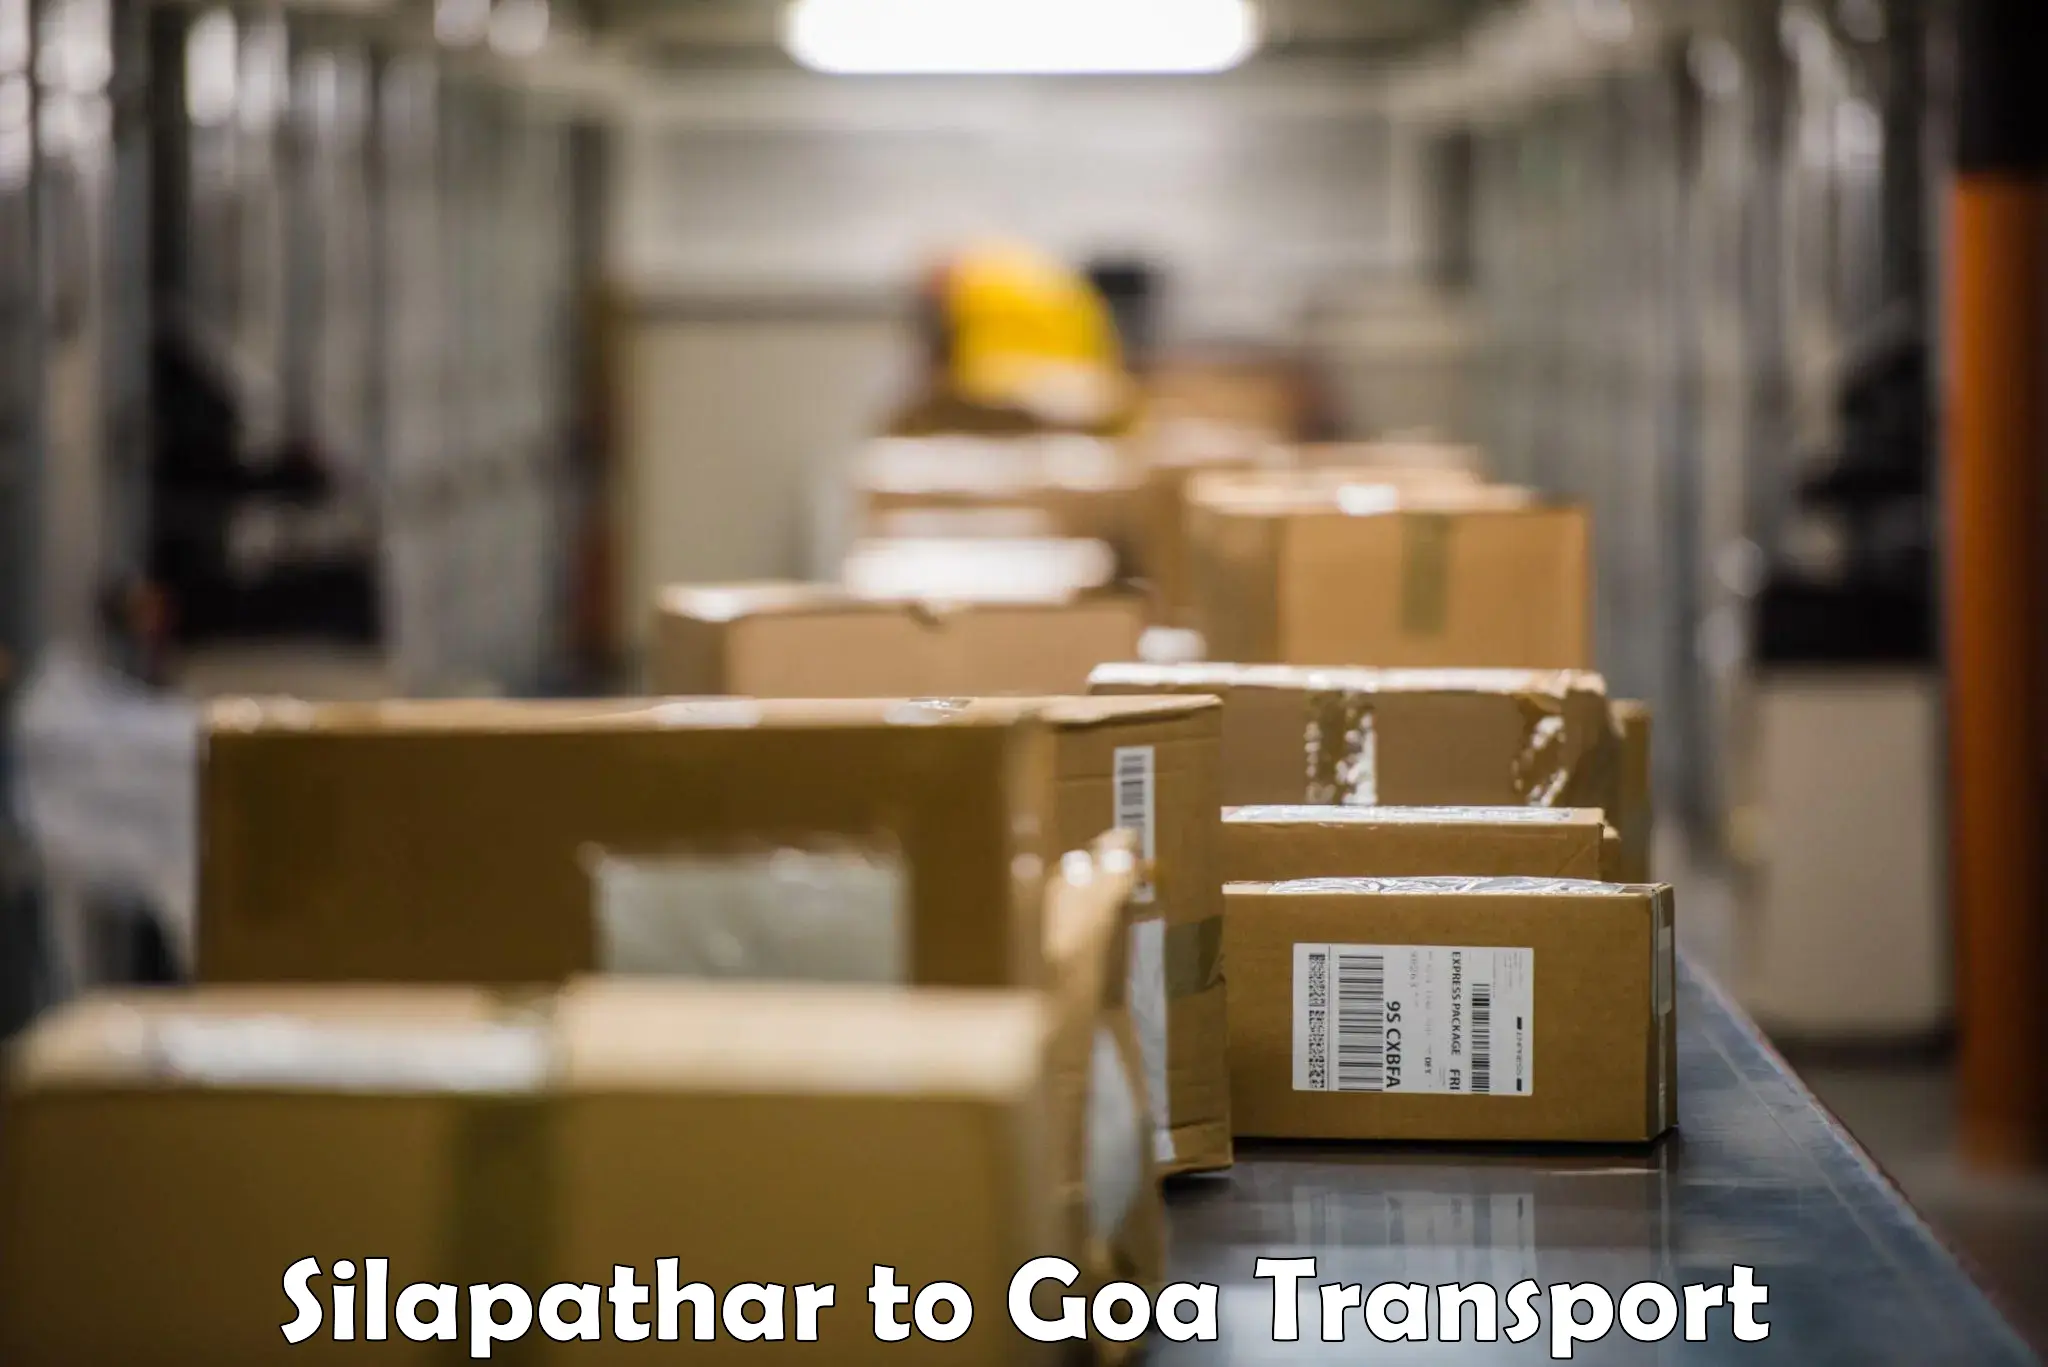 Express transport services Silapathar to Ponda